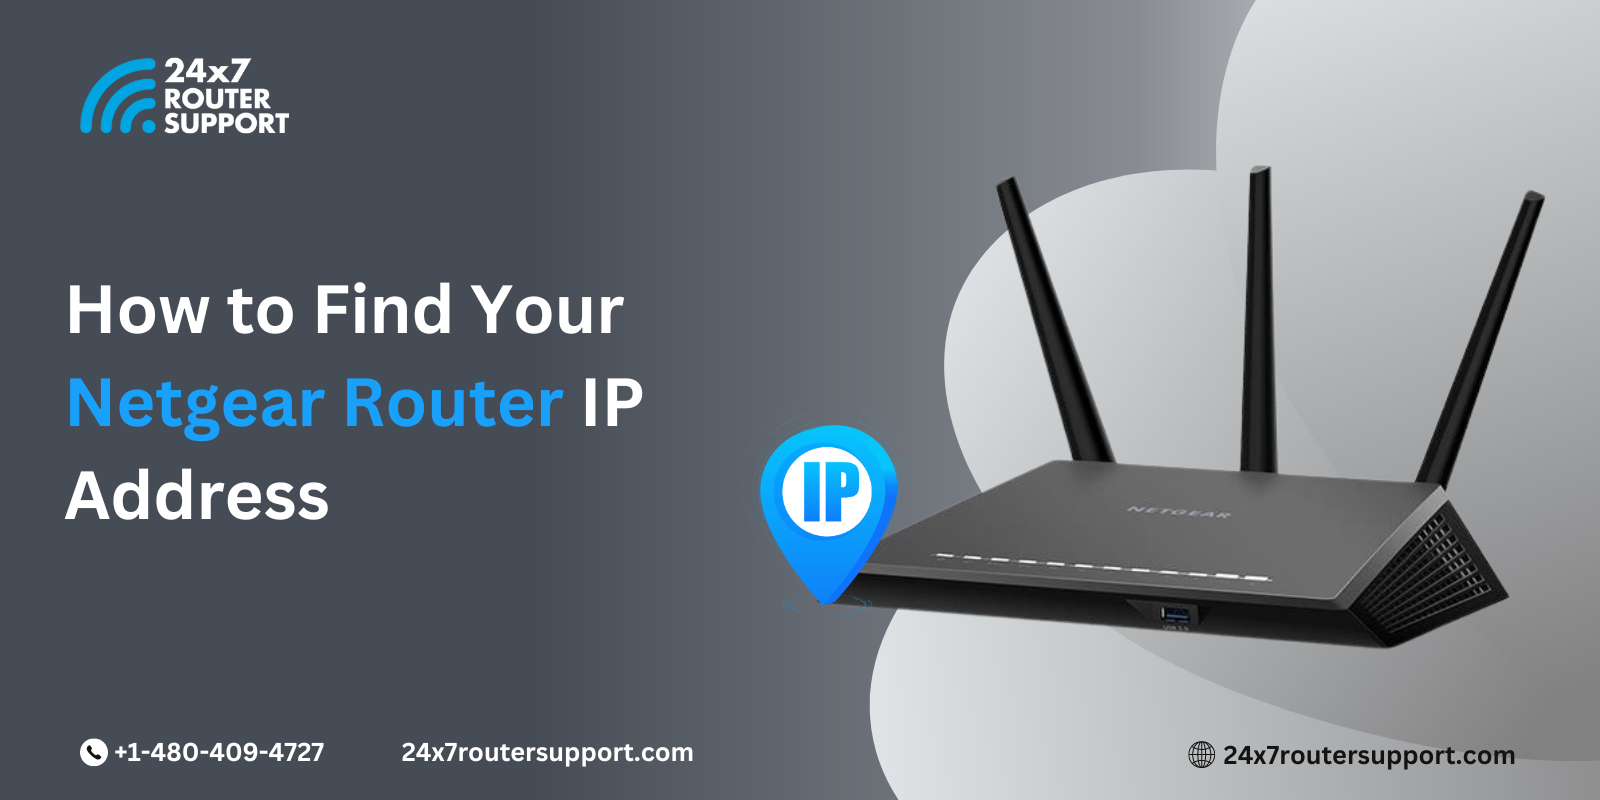 How to Find Your Netgear Router IP Address